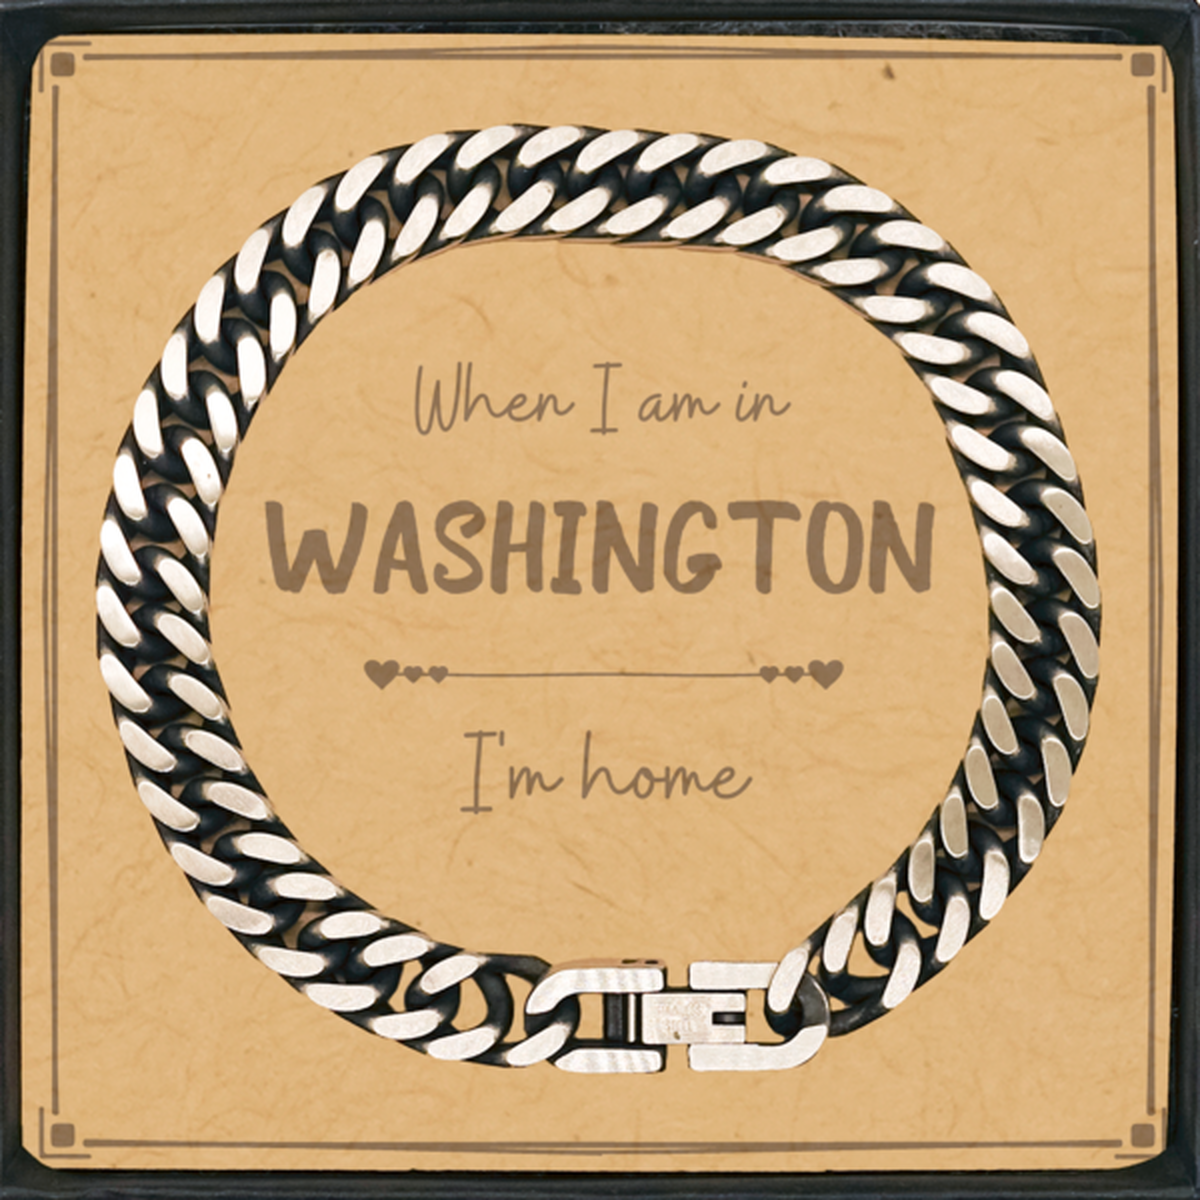 When I am in Washington I'm home Cuban Link Chain Bracelet, Message Card Gifts For Washington, State Washington Birthday Gifts for Friends Coworker